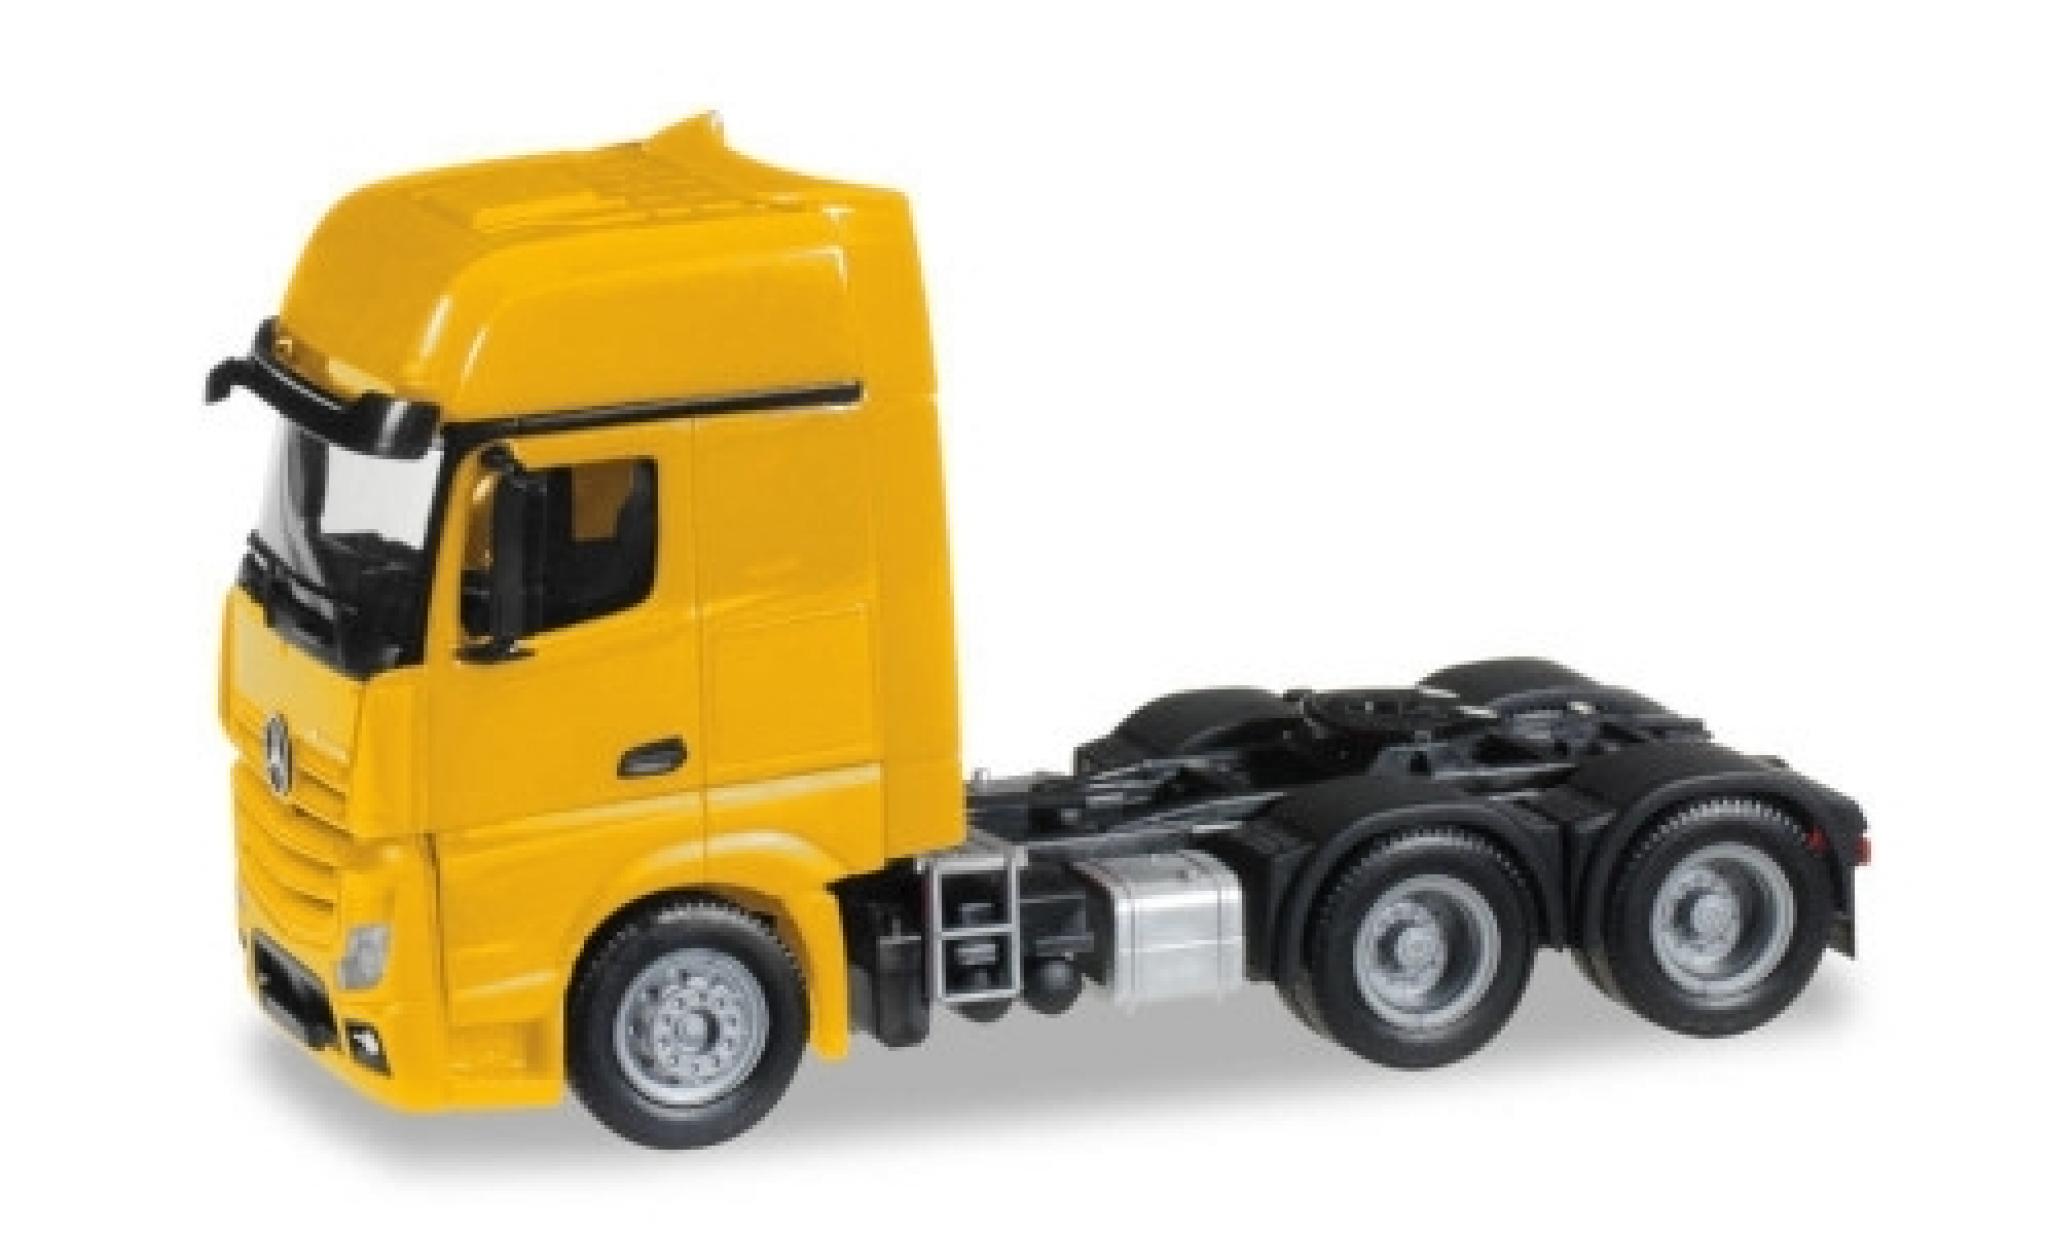 Mercedes Actros 1/87 Herpa Gigaspace 6x4 yellow Solozugmaschine